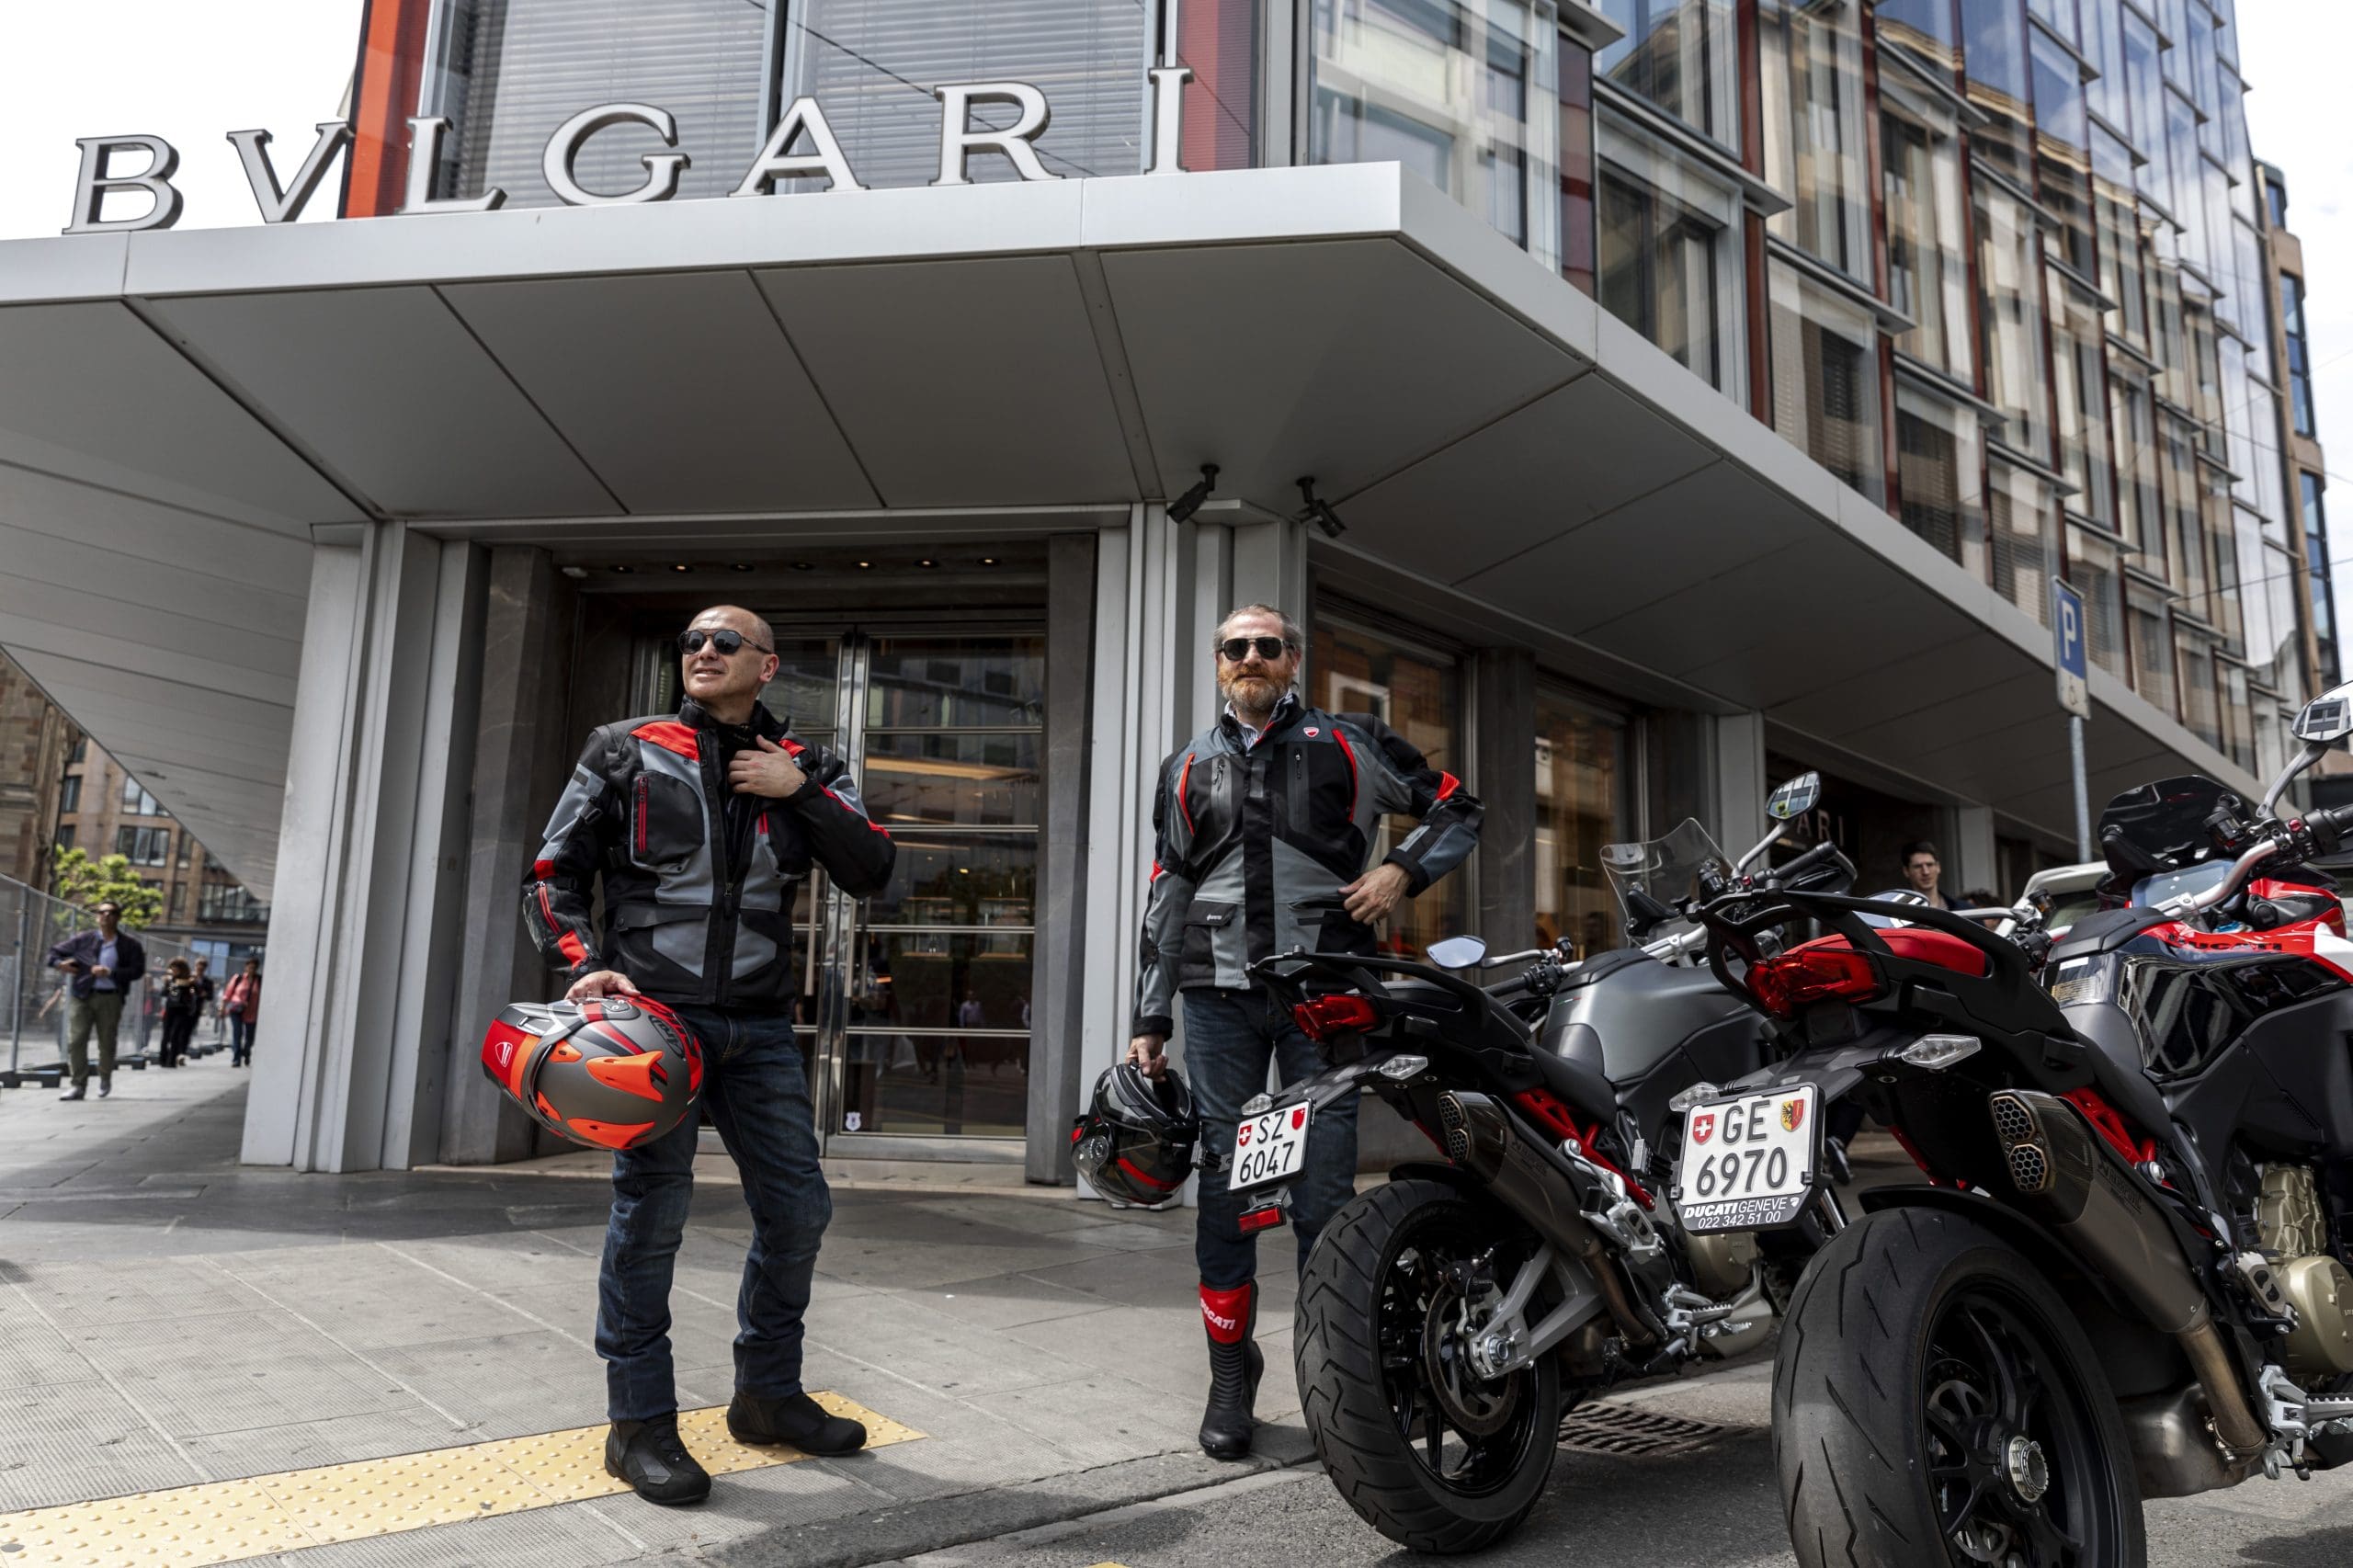 two motorcyclists showcasing the Bulgari Aluminum Ducati Special Edition chronograph, which is now available on Bulgari's webpage for $5,000 and is advertised as "The best Bulgari watch ever made."